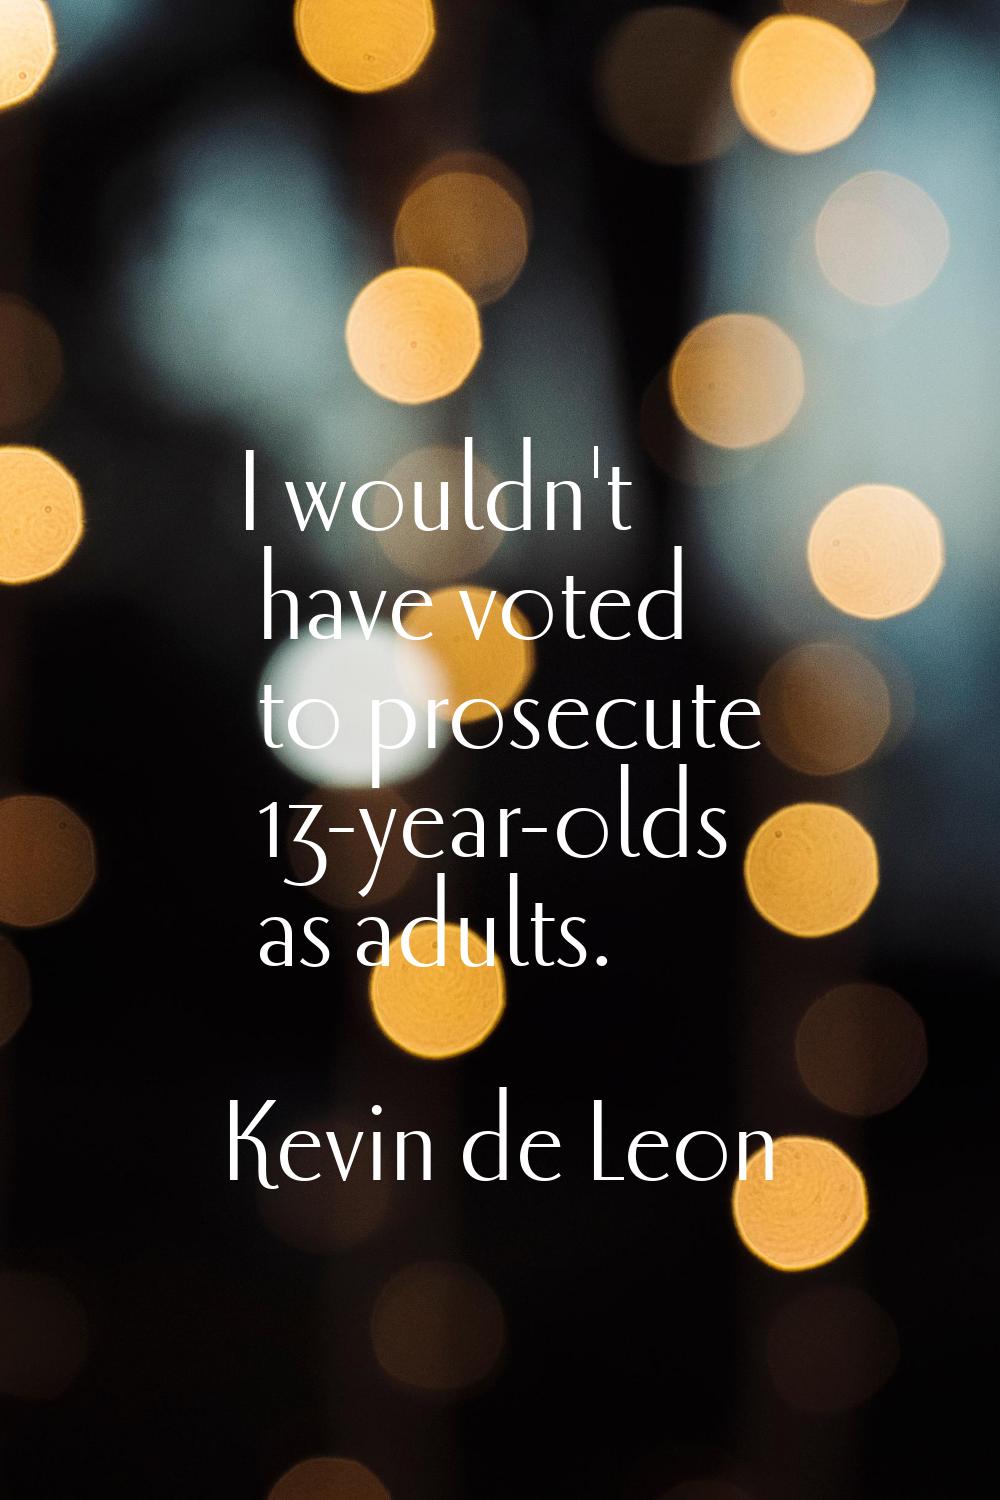 I wouldn't have voted to prosecute 13-year-olds as adults.